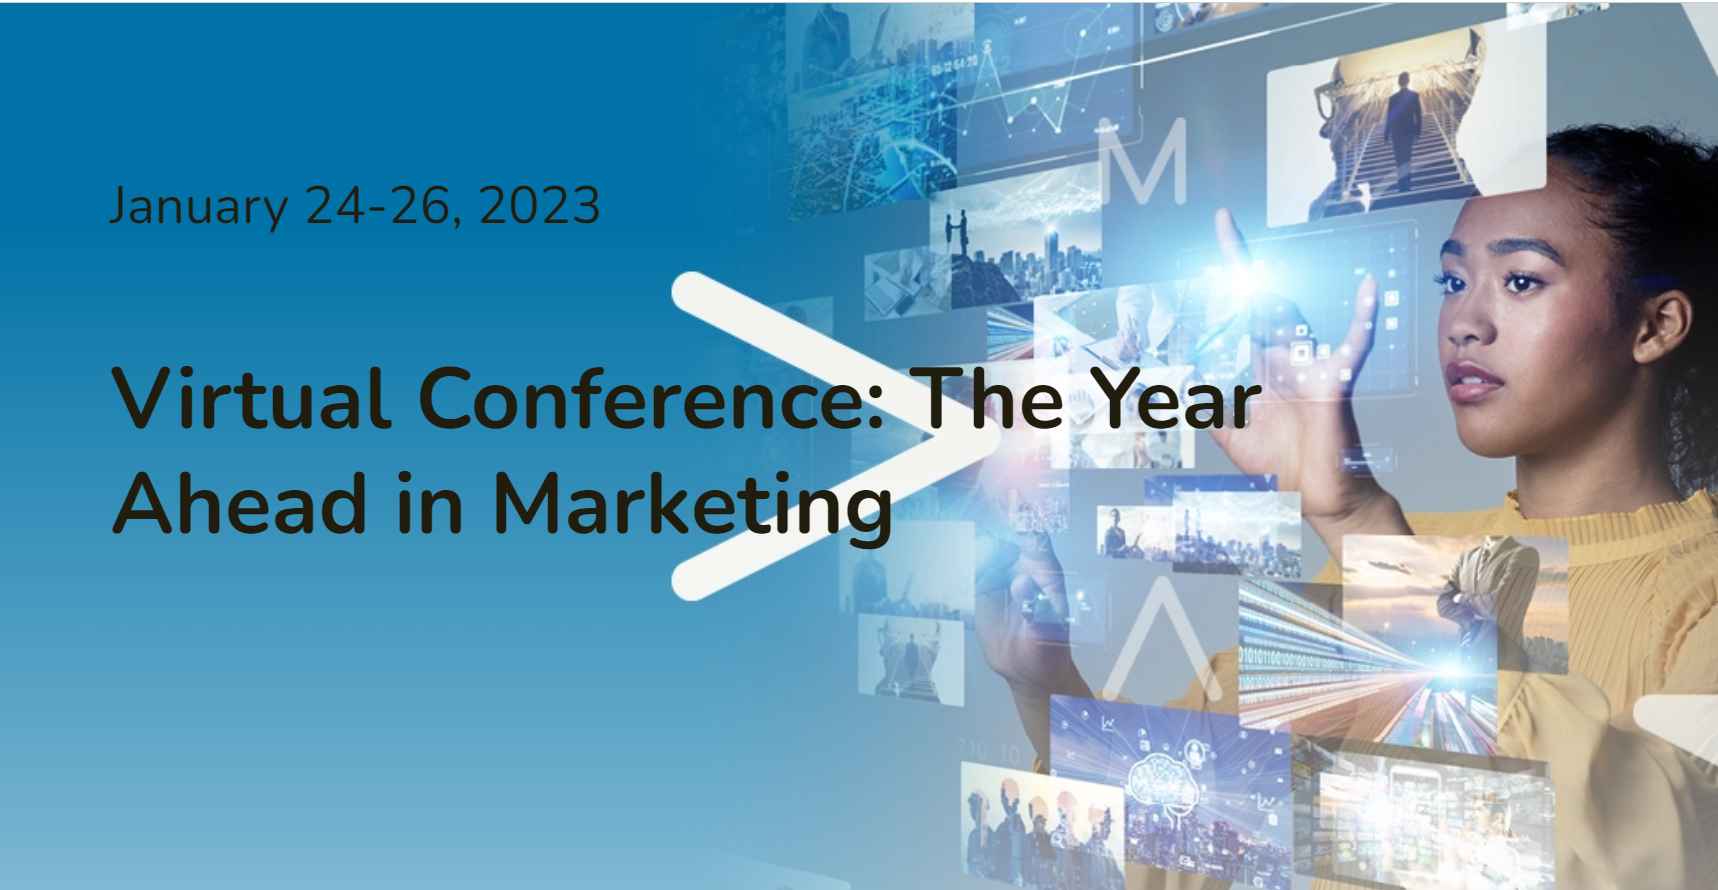 The Year Ahead in Marketing